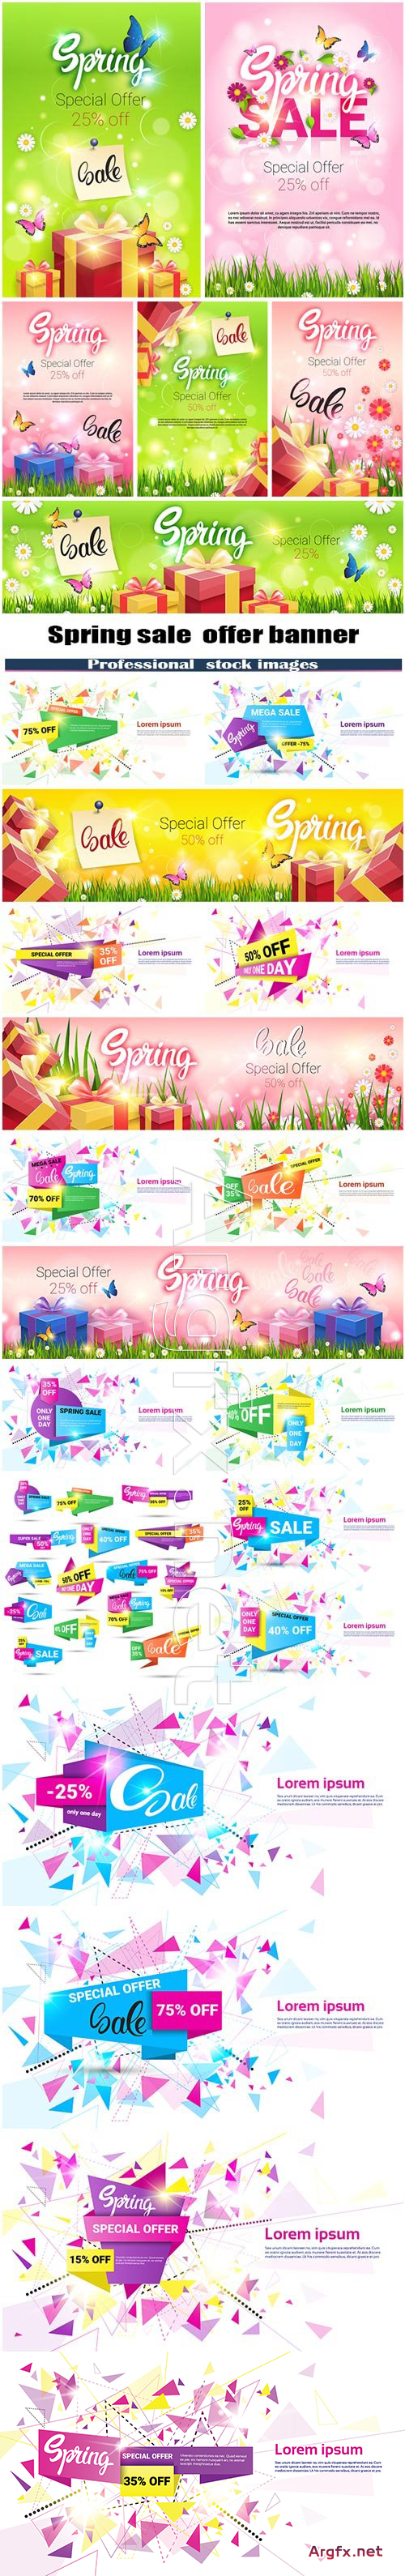 Spring sale shopping special offer holiday banner